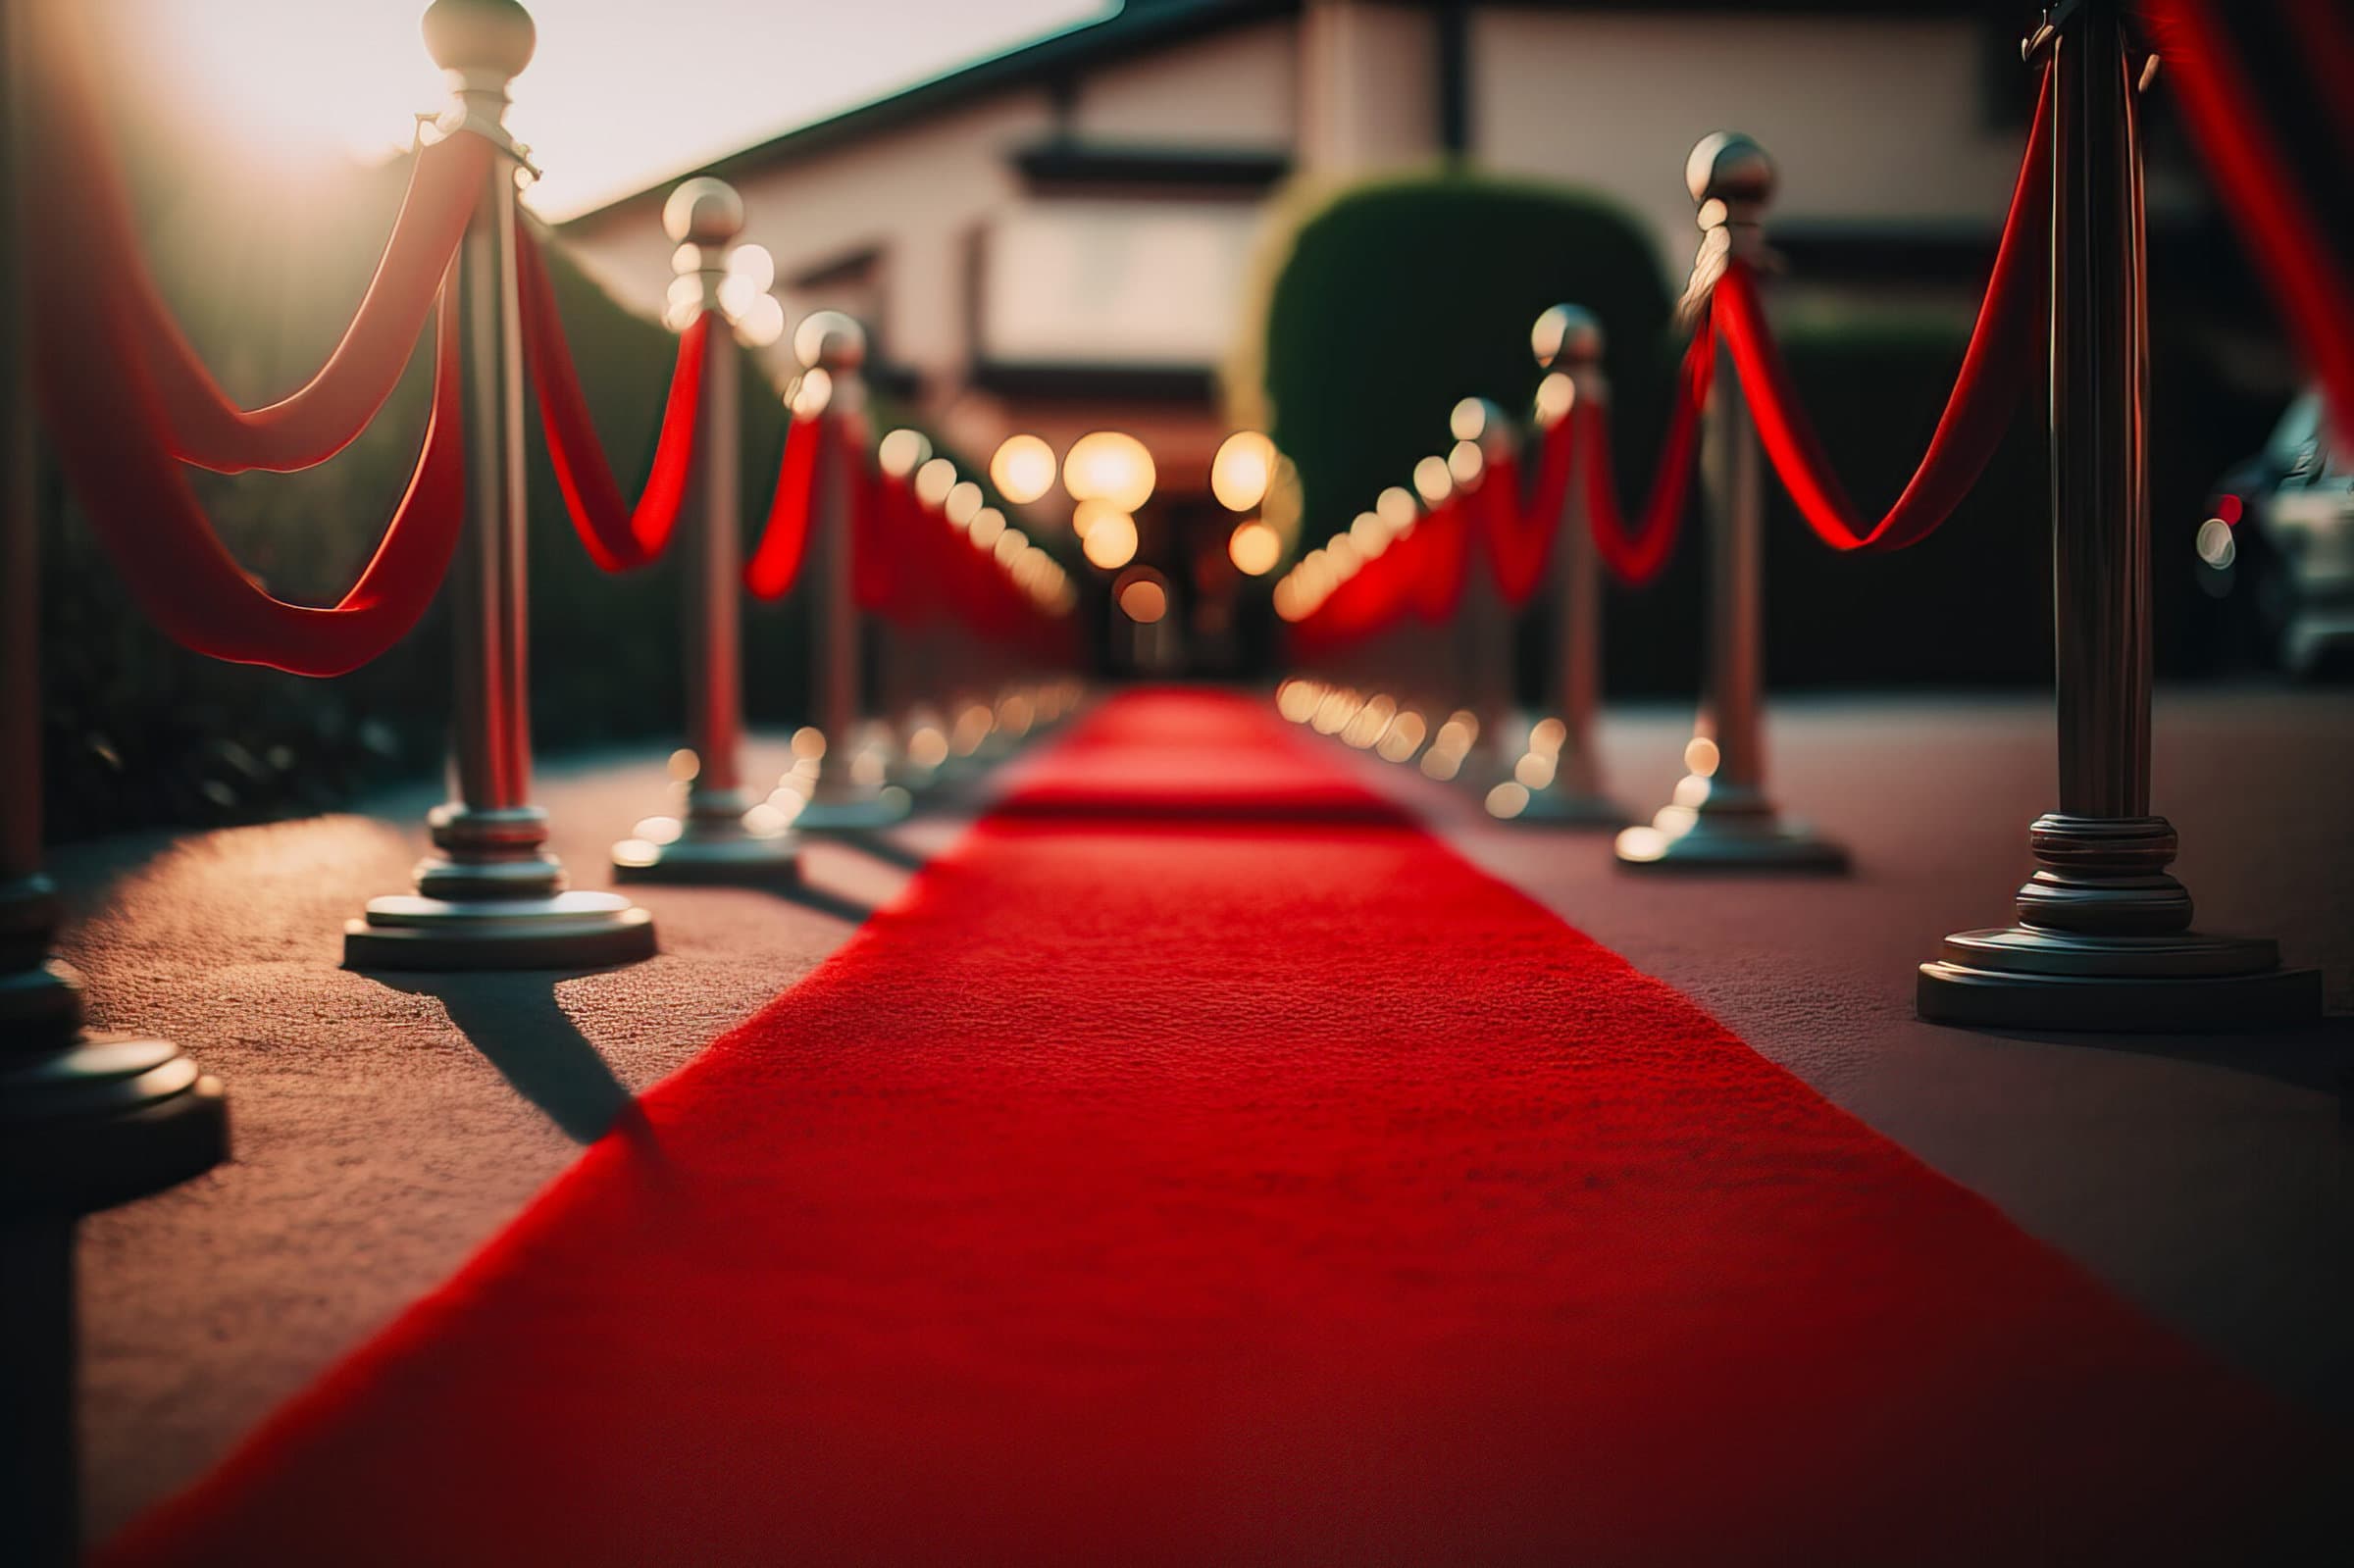 Red Carpet hallway with barriers and red ropes for Cinema and Fa